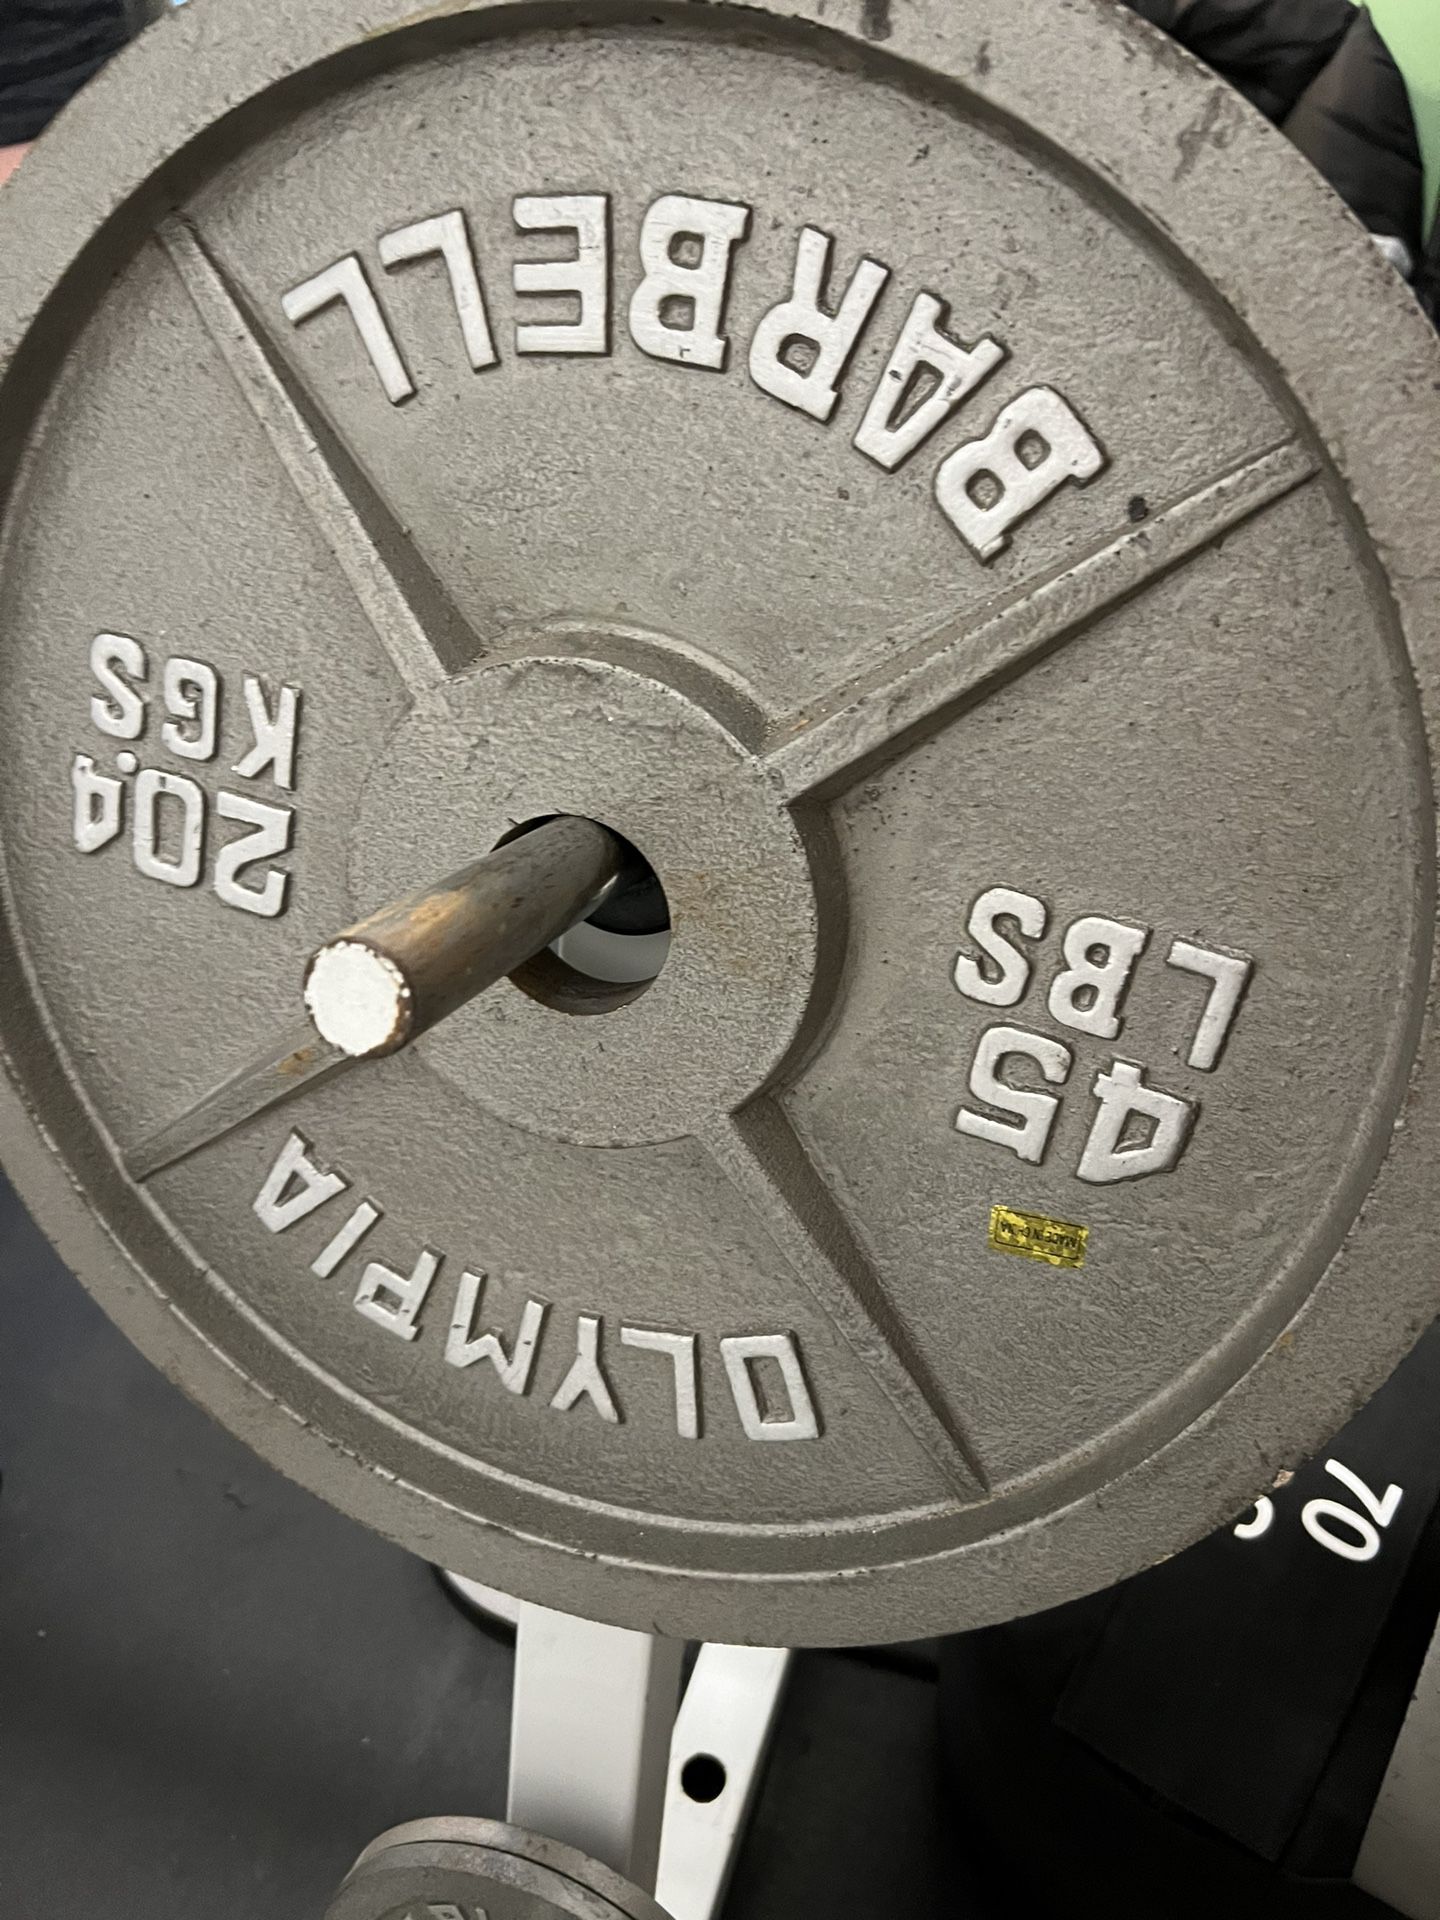 Weights Plates